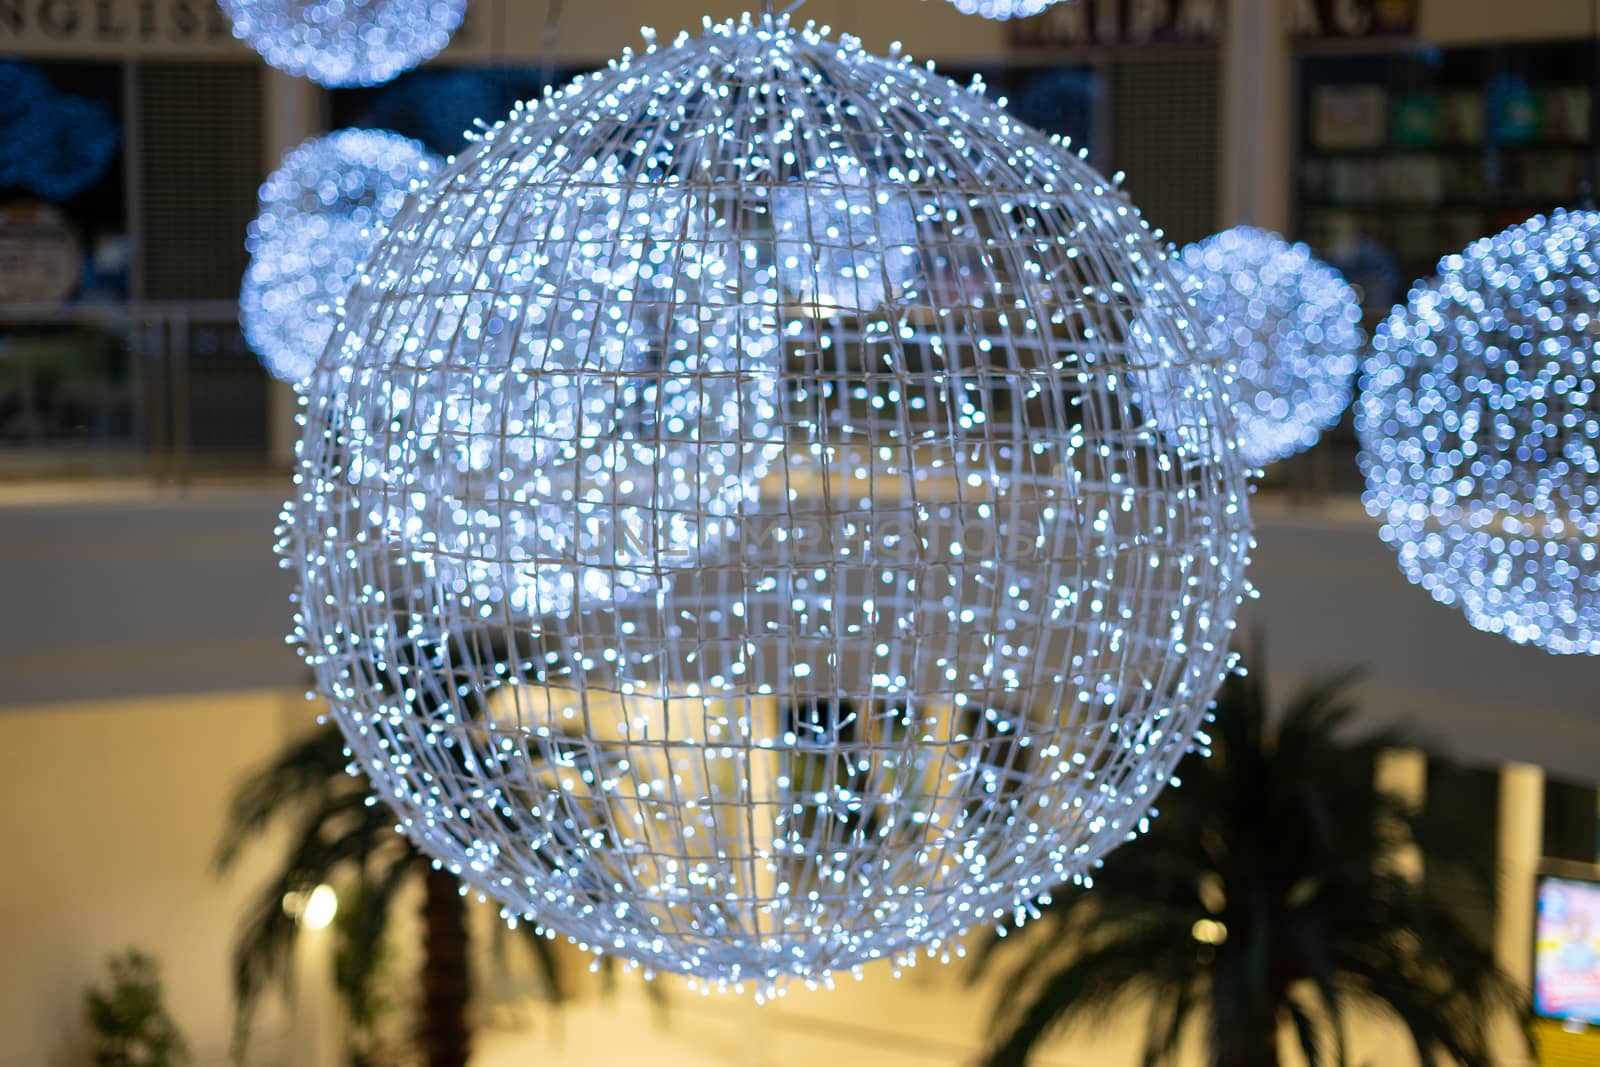 big bright balls with garlands. balls with white lights. decorations in the mall